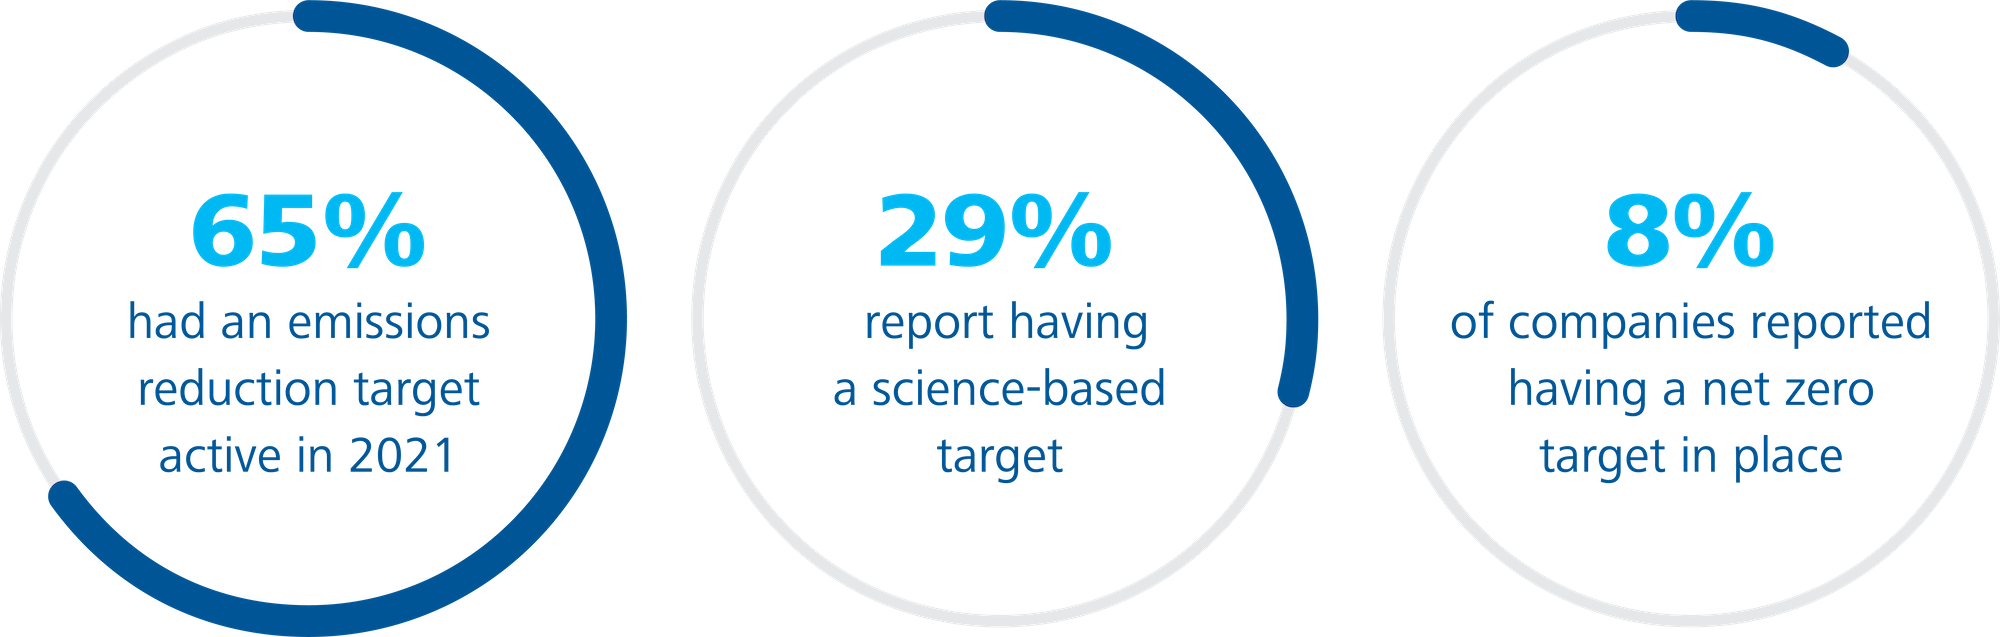 Image: Corporate net zero and science-based targets are low in the Asia Pacific region